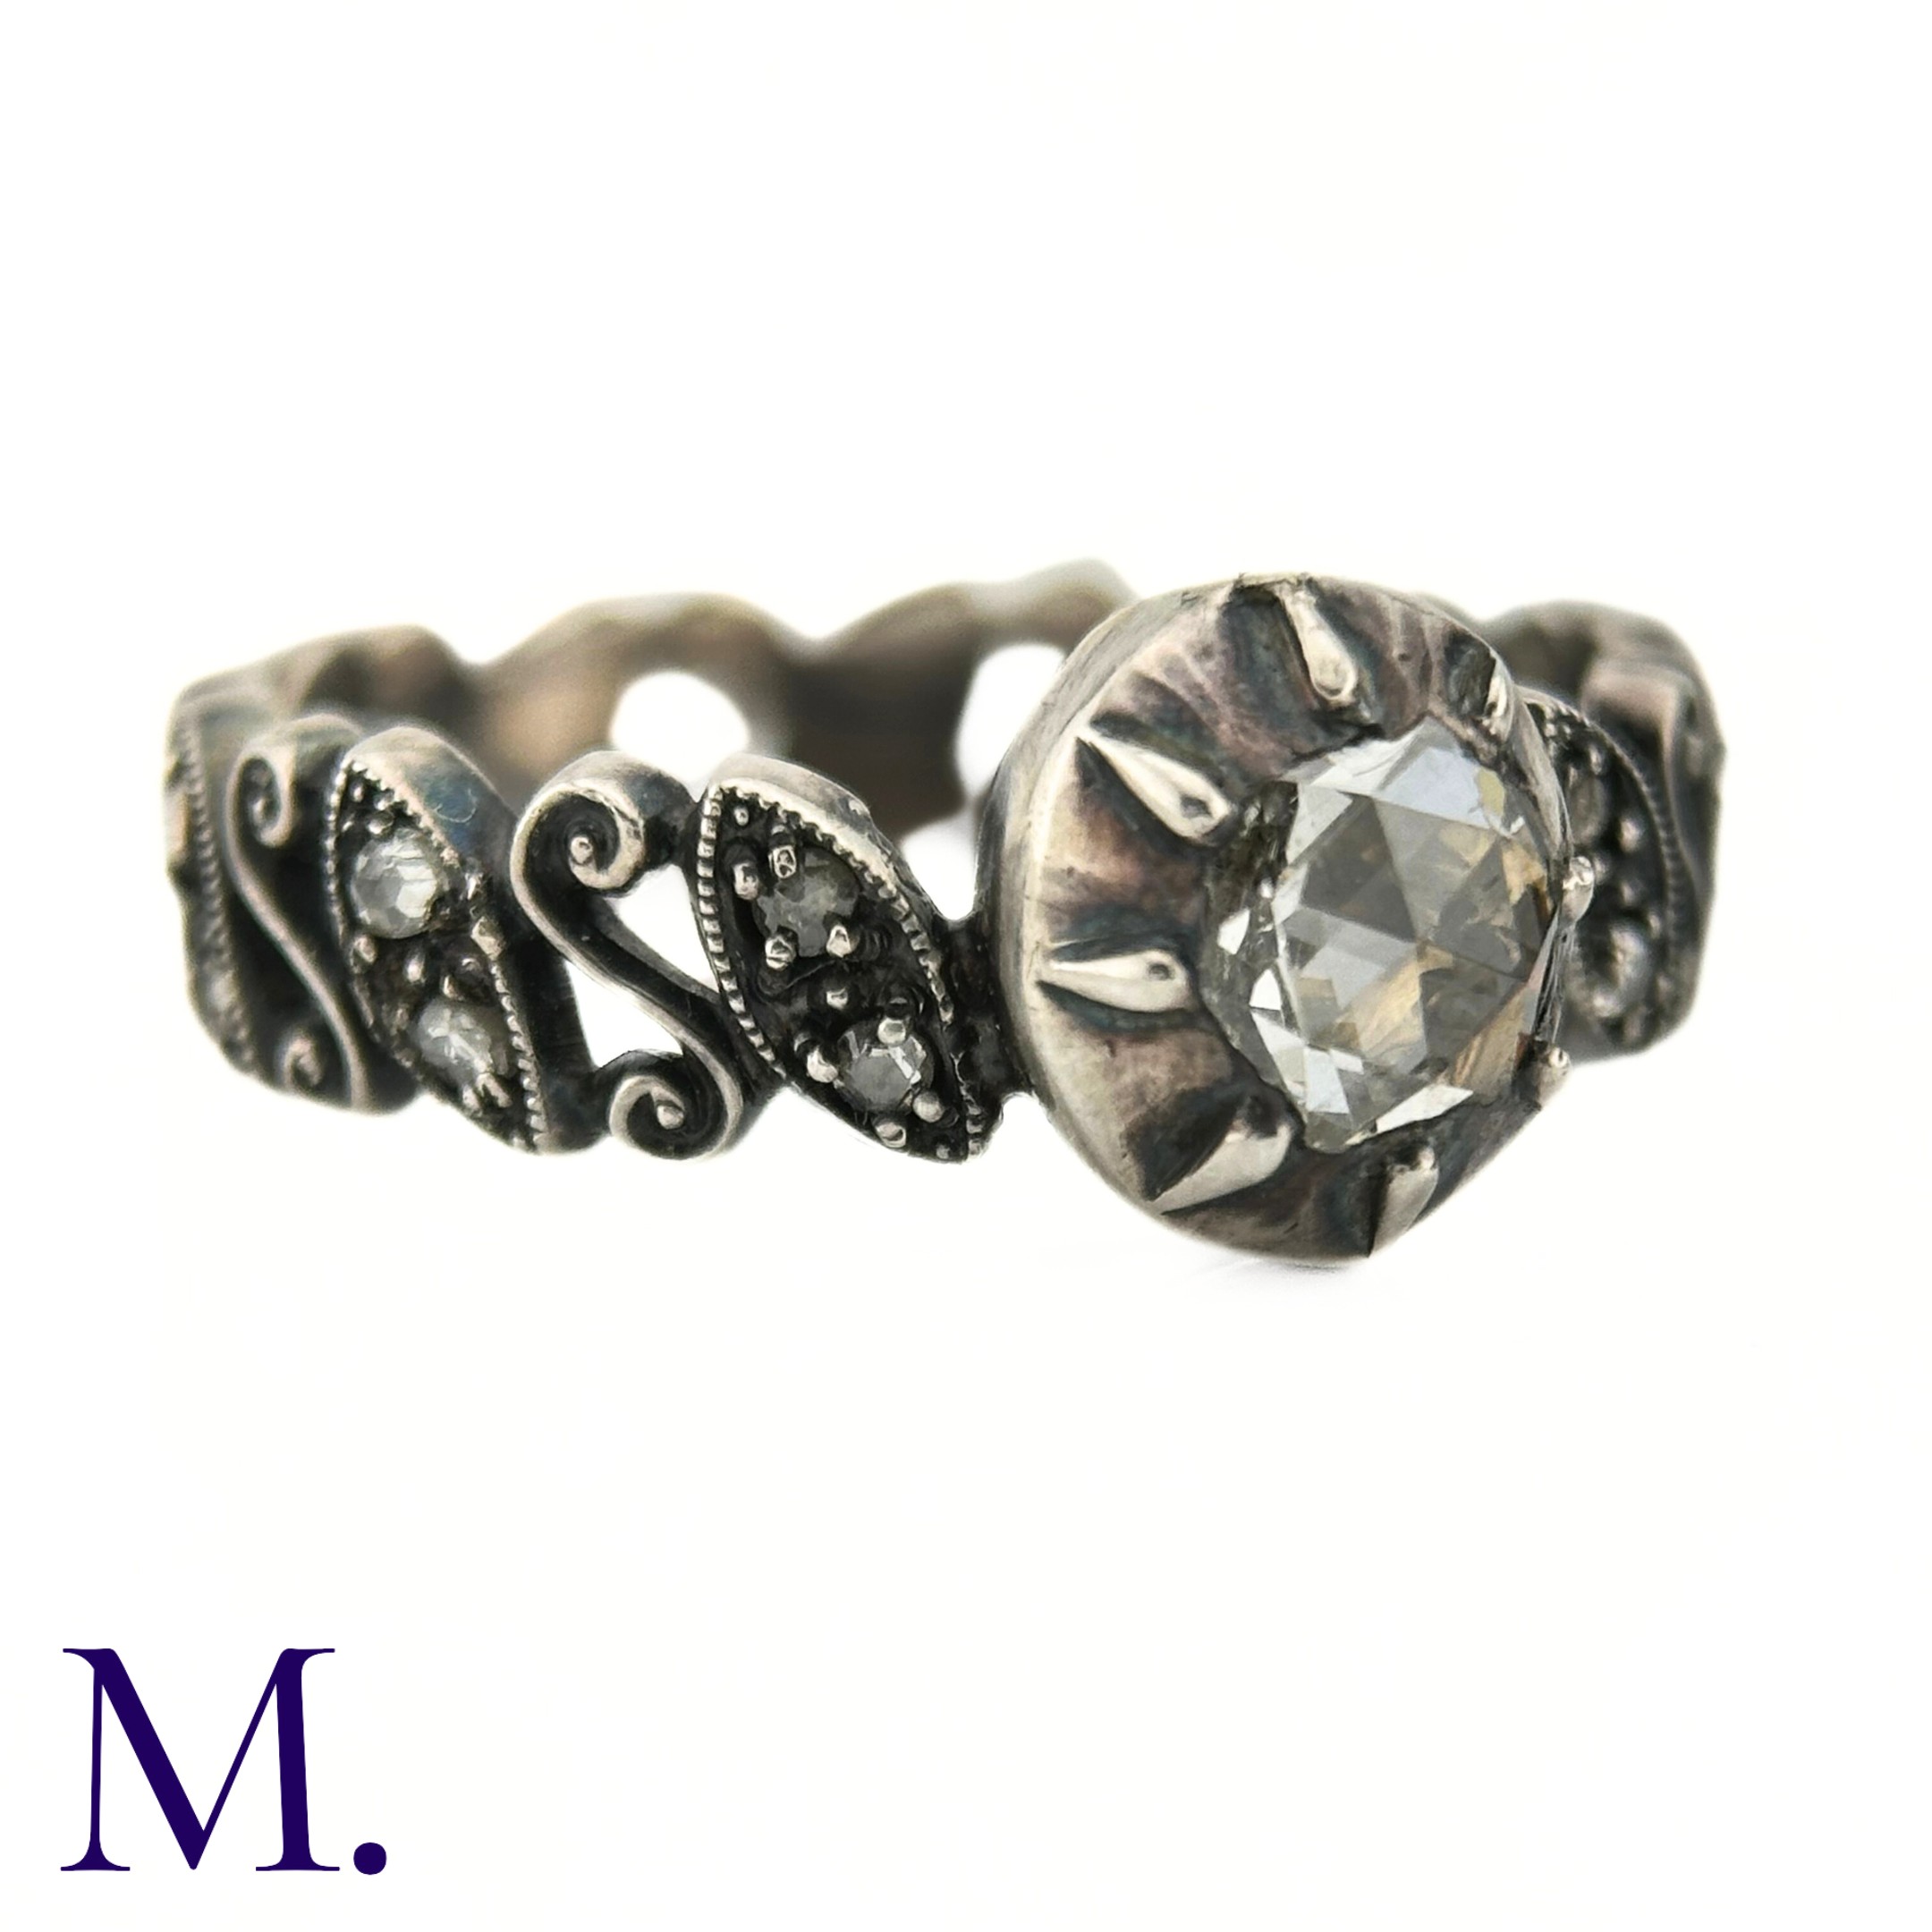 An Antique Rose Diamond Ring The antique ring is set with a round rose cut diamond (approx. 5x5mm) - Image 3 of 4